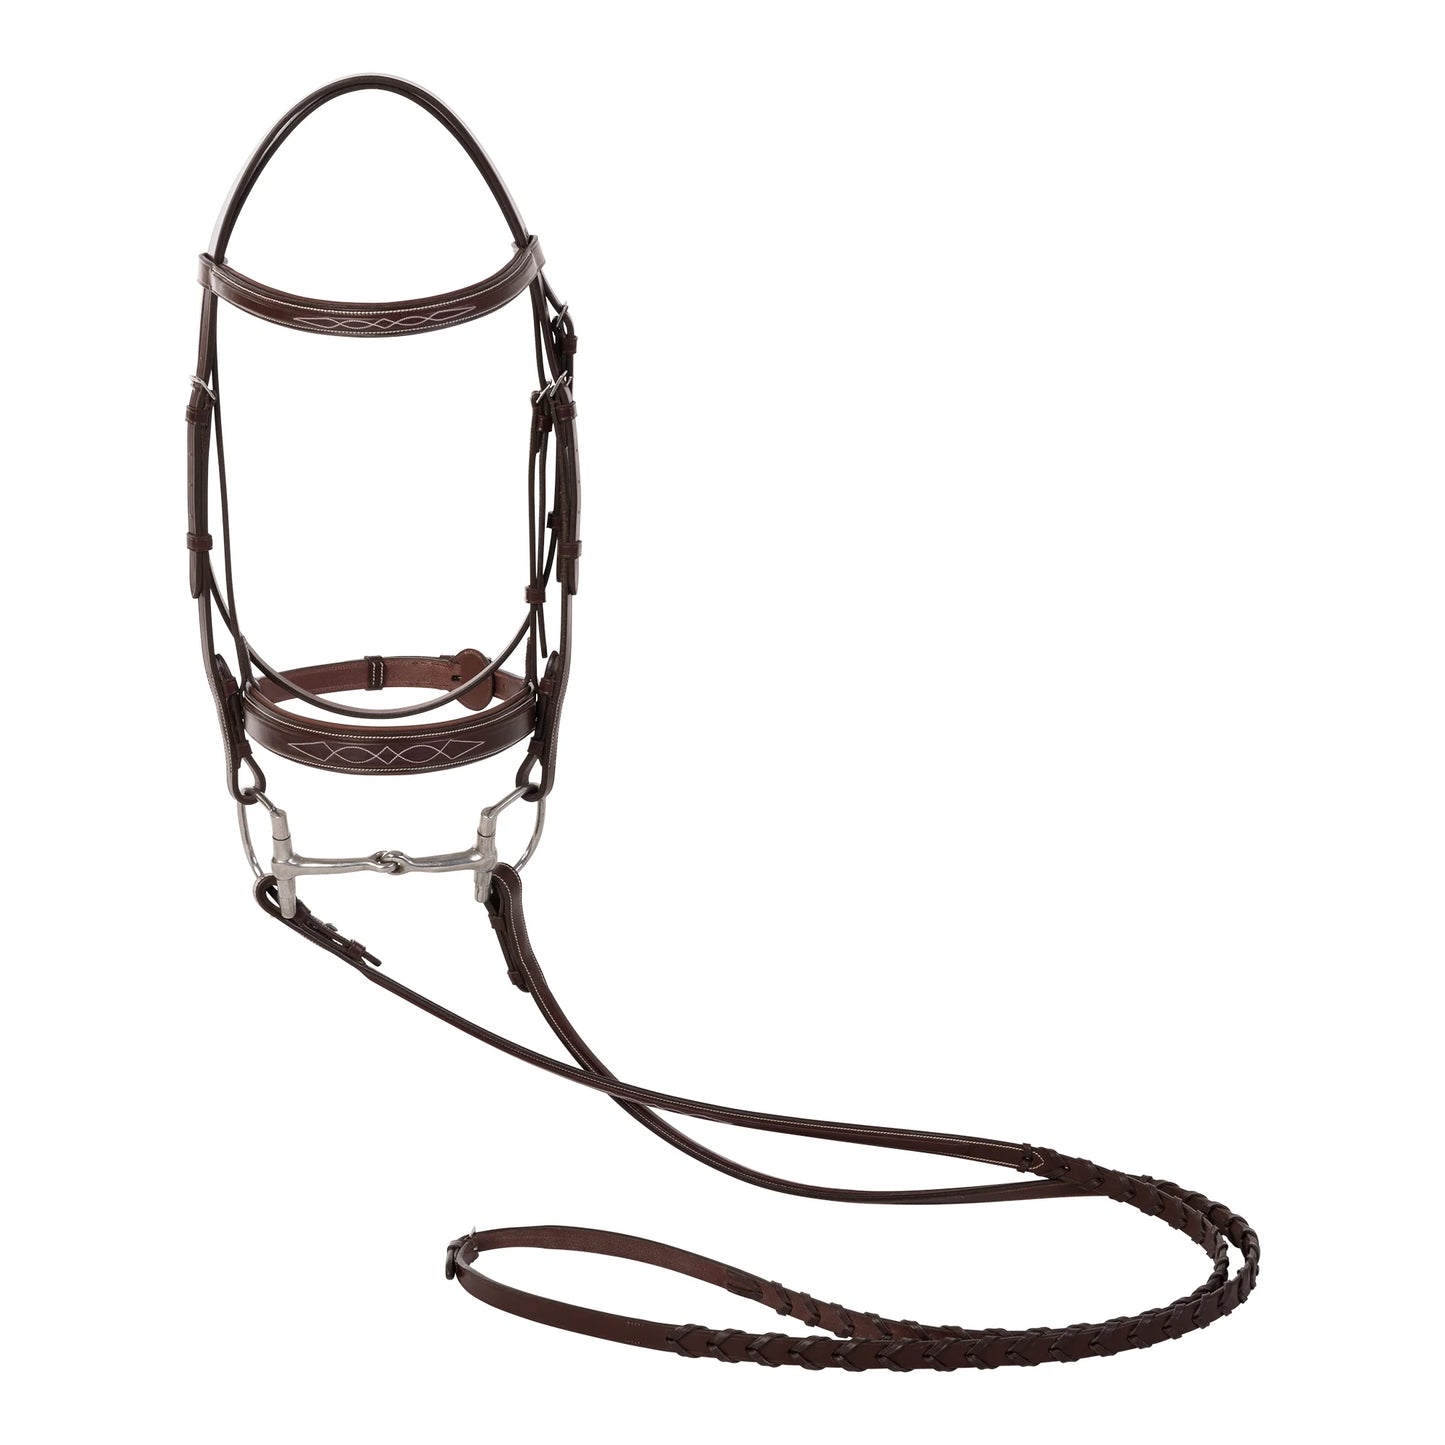 Sedgwick Fancy Stitched Leather Padded Bridle with Reins